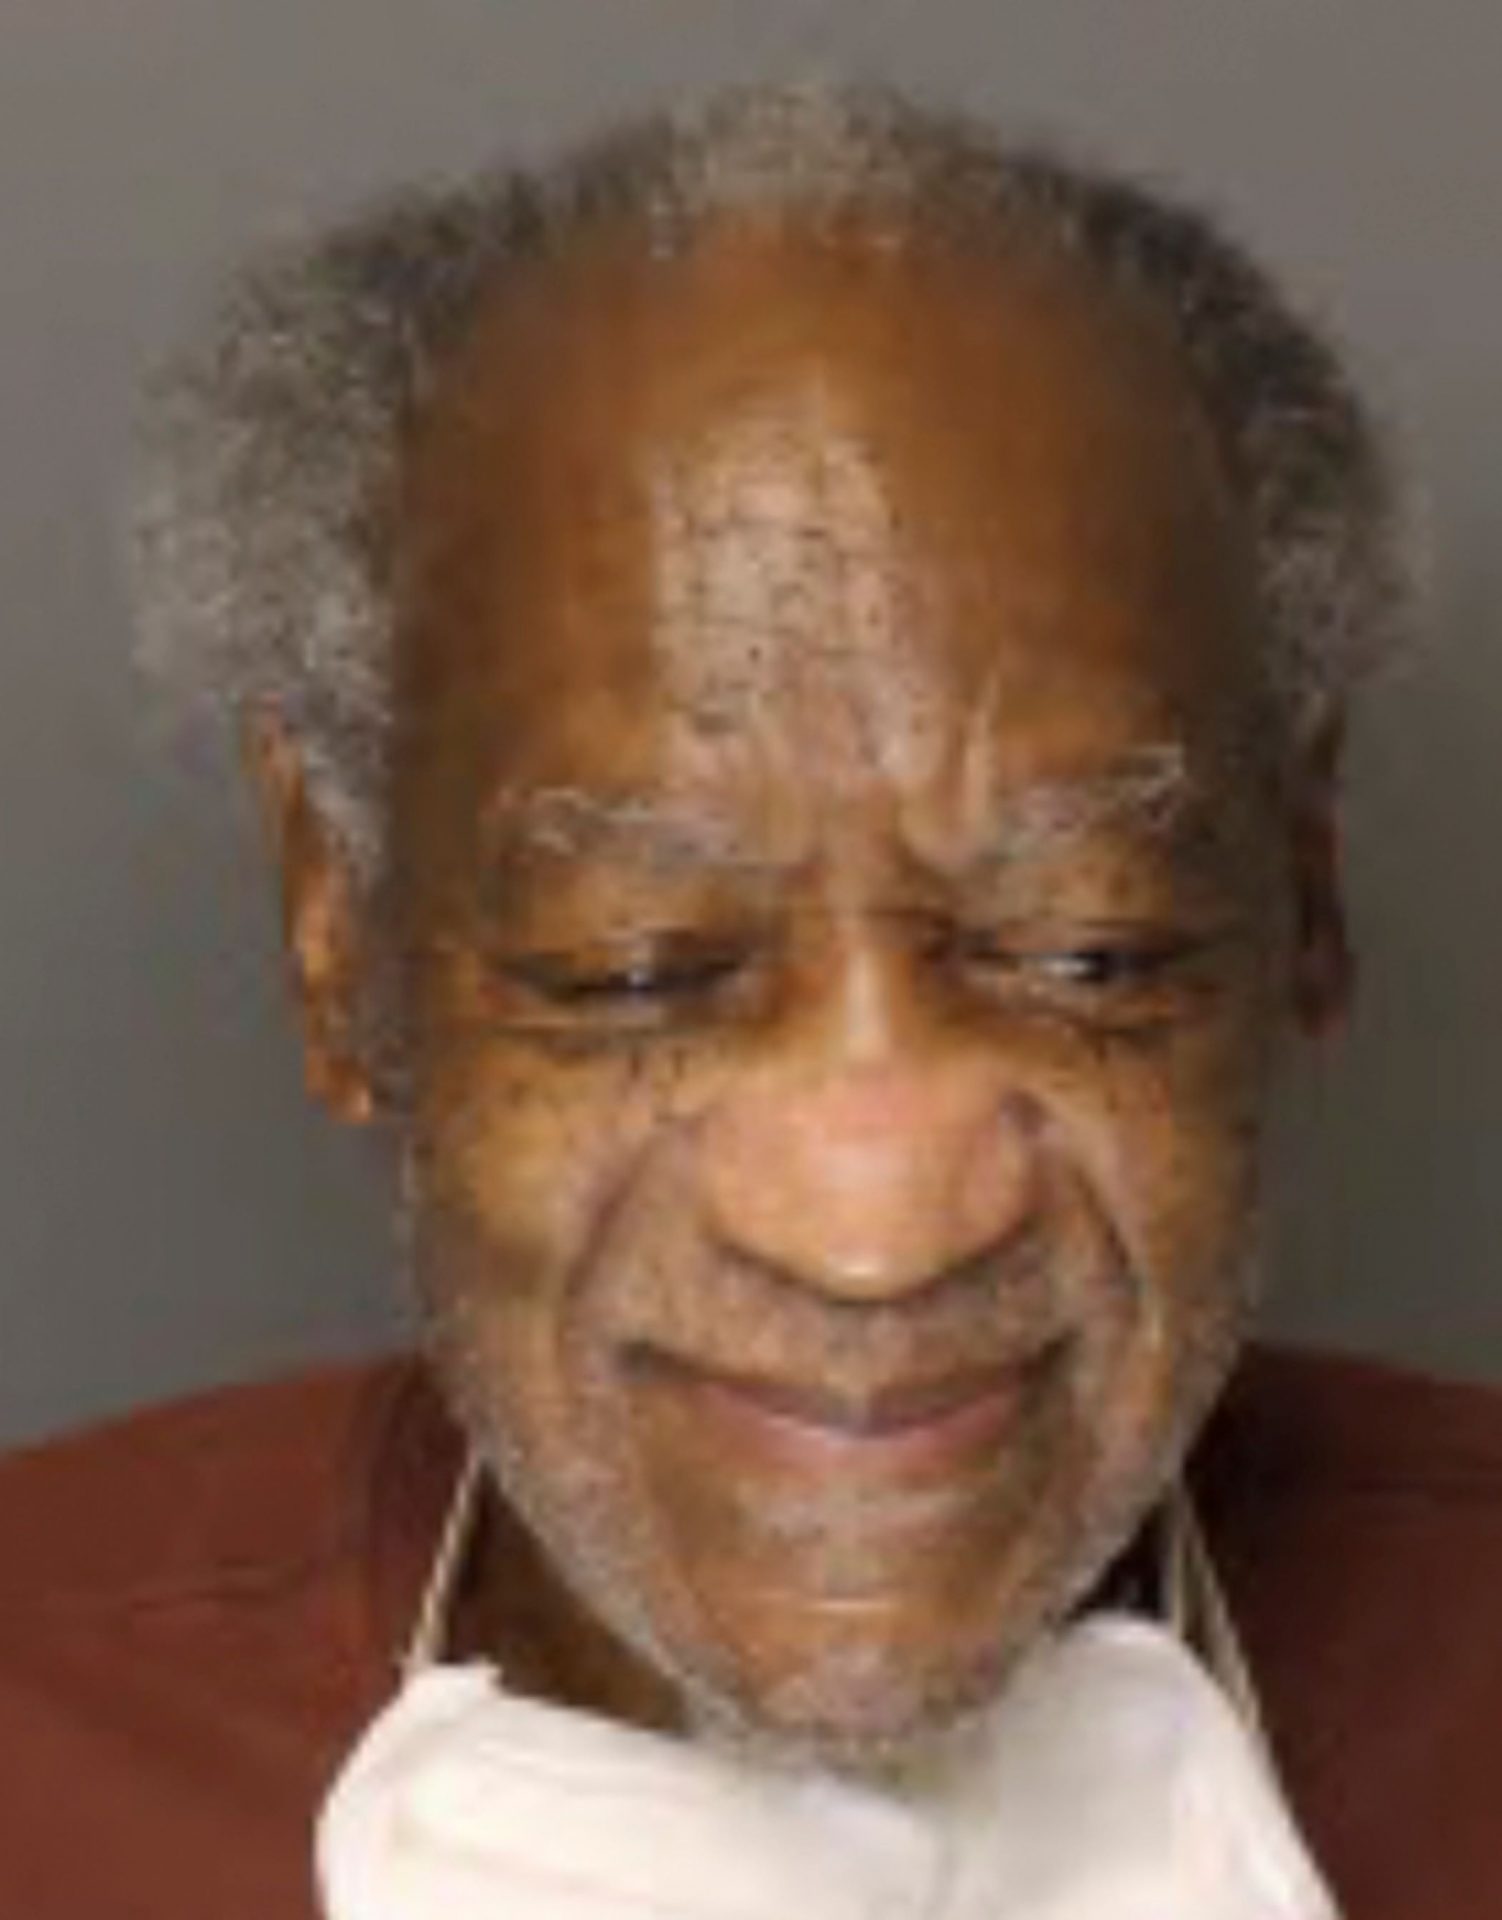 This Tuesday, Sept. 4, 2020, inmate photo provided by the Pennsylvania Department of Corrections shows Bill Cosby. The Pennsylvania Department of Corrections recently updated the 83-year-old Cosby’s mugshot. Cosby was convicted of felony sex assault and is serving a three- to 10-year prison term.